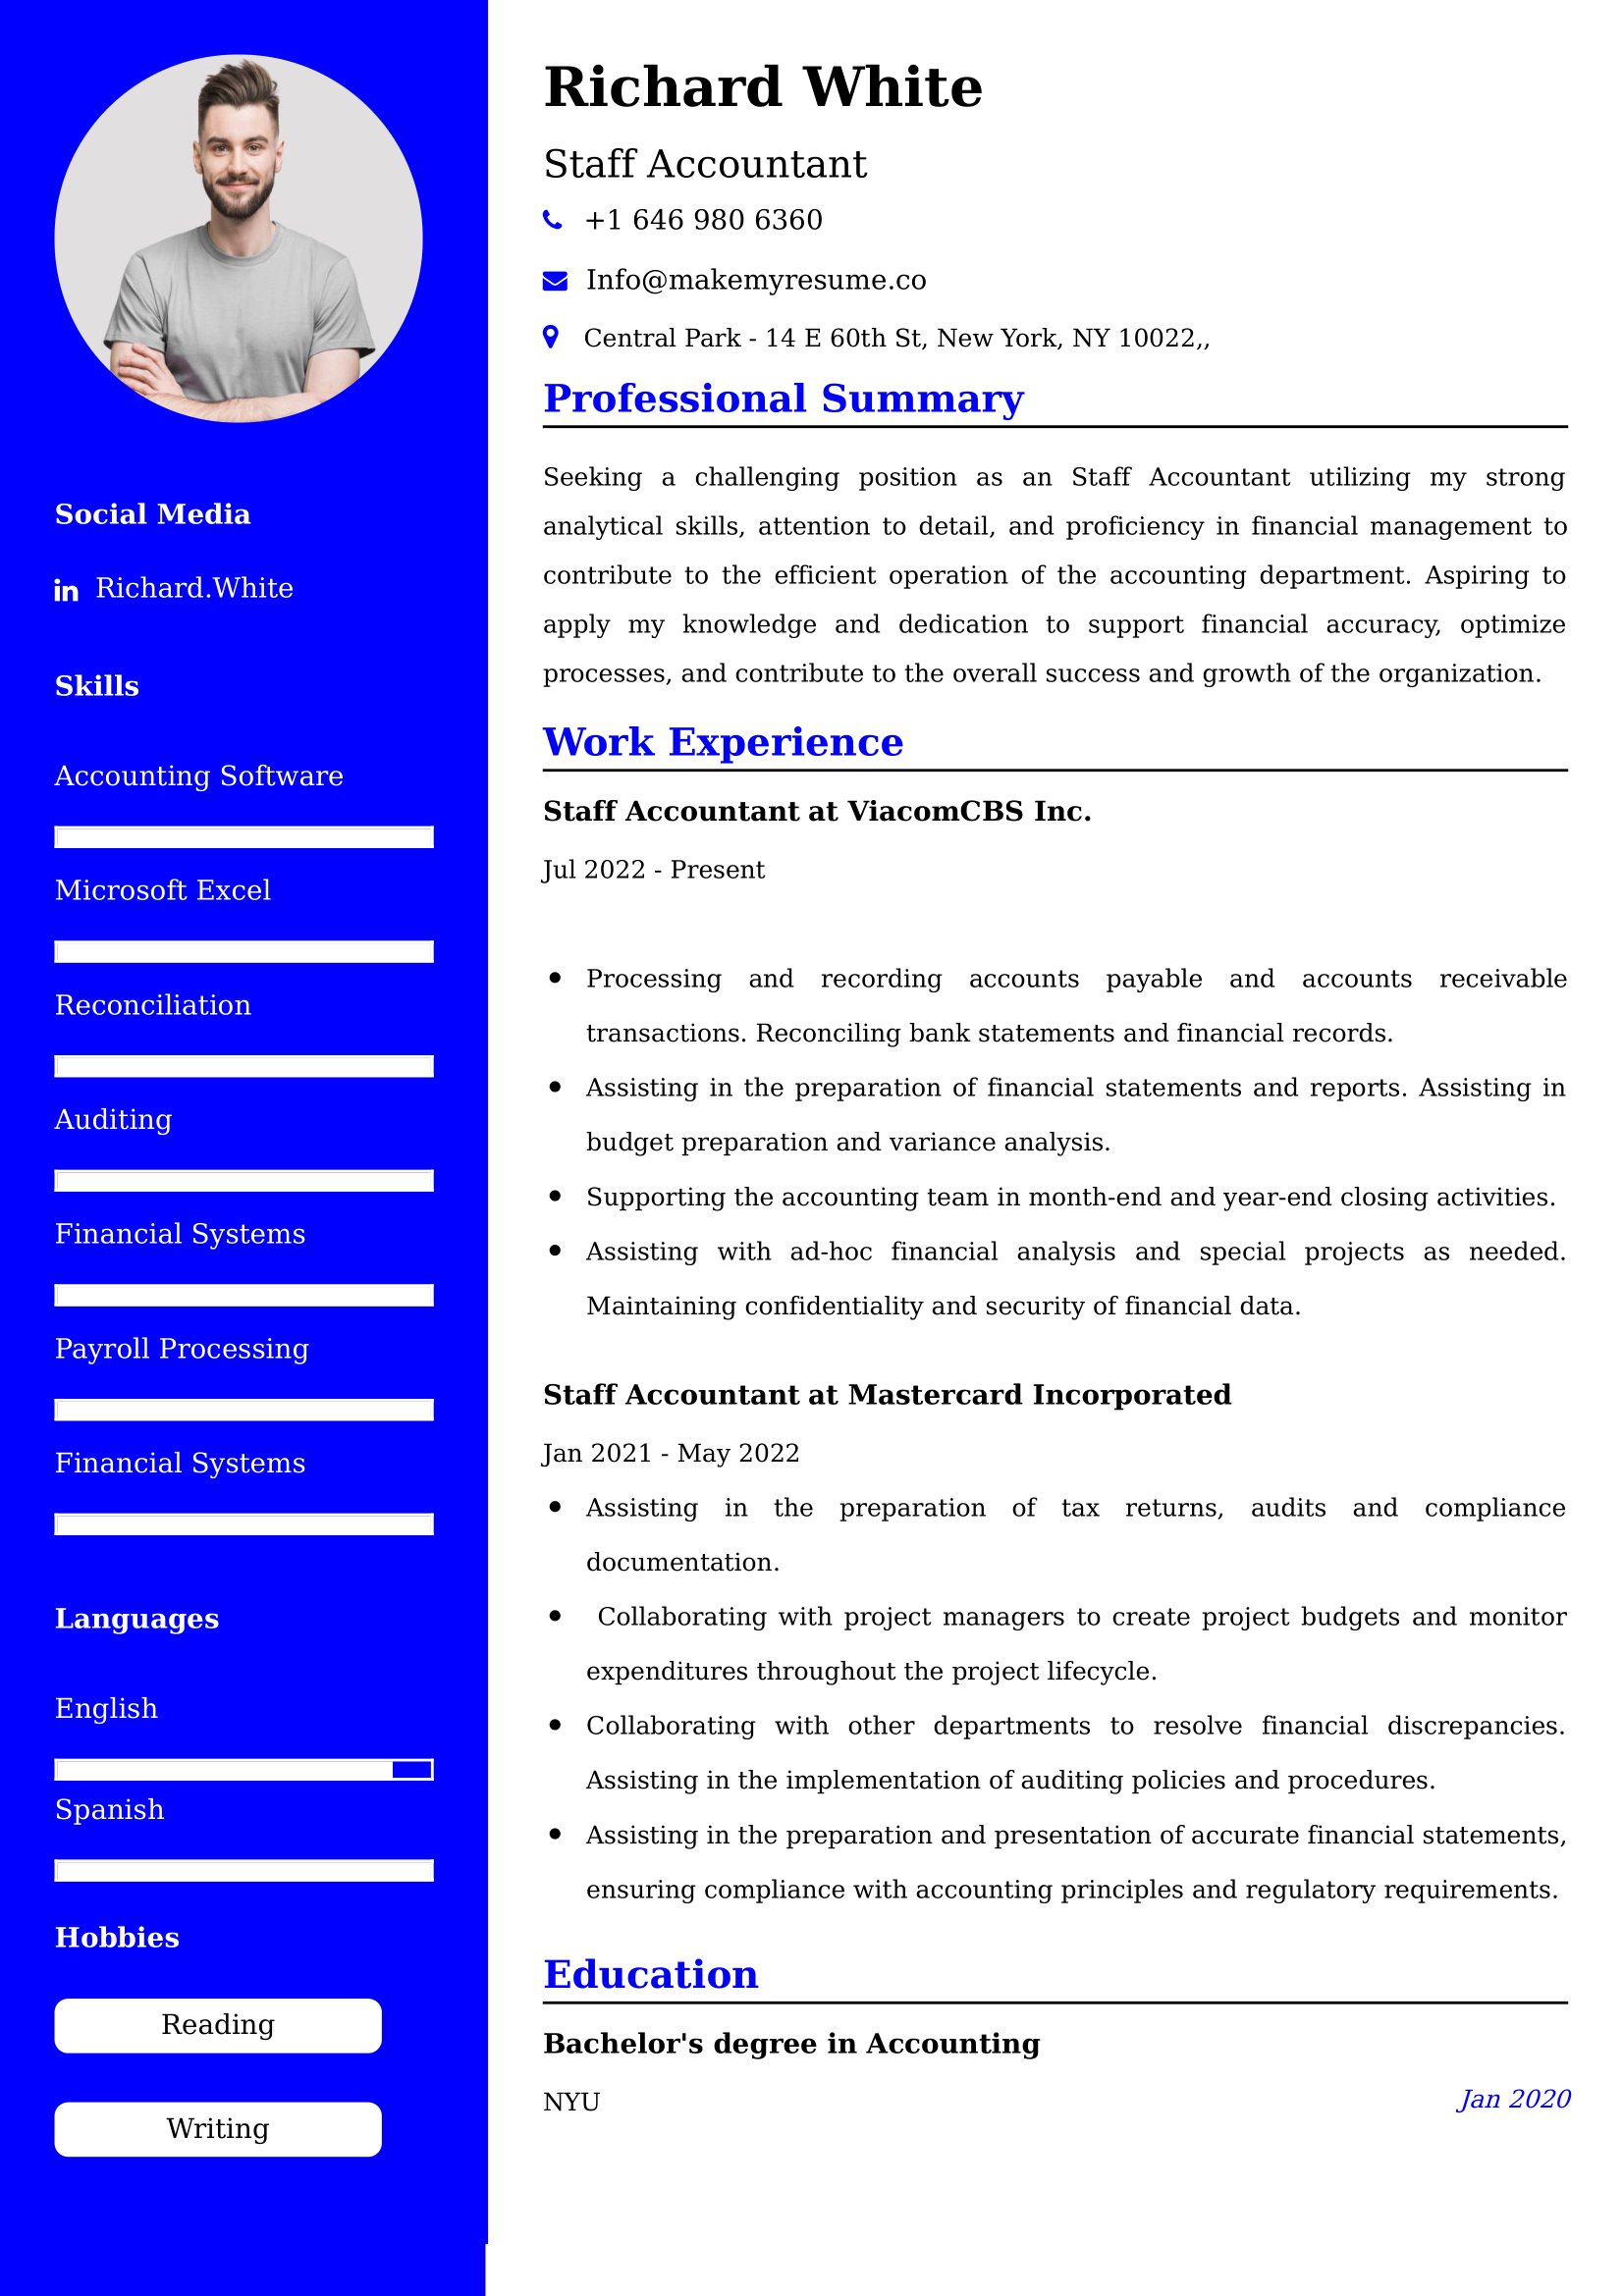 Staff Accountant Resume Examples Canada